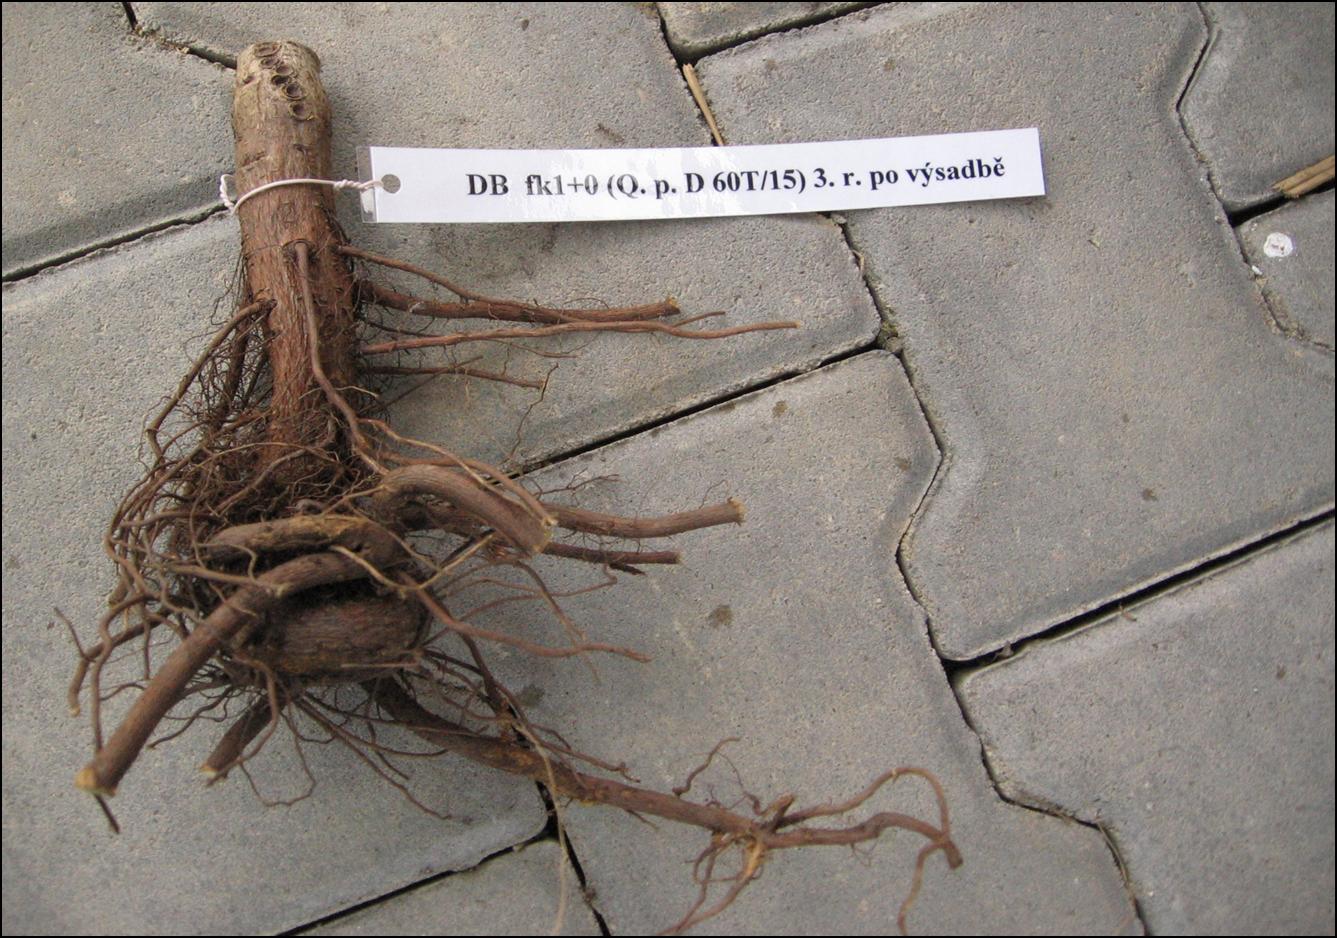 Deformed root system of Oak (Quercus) tree